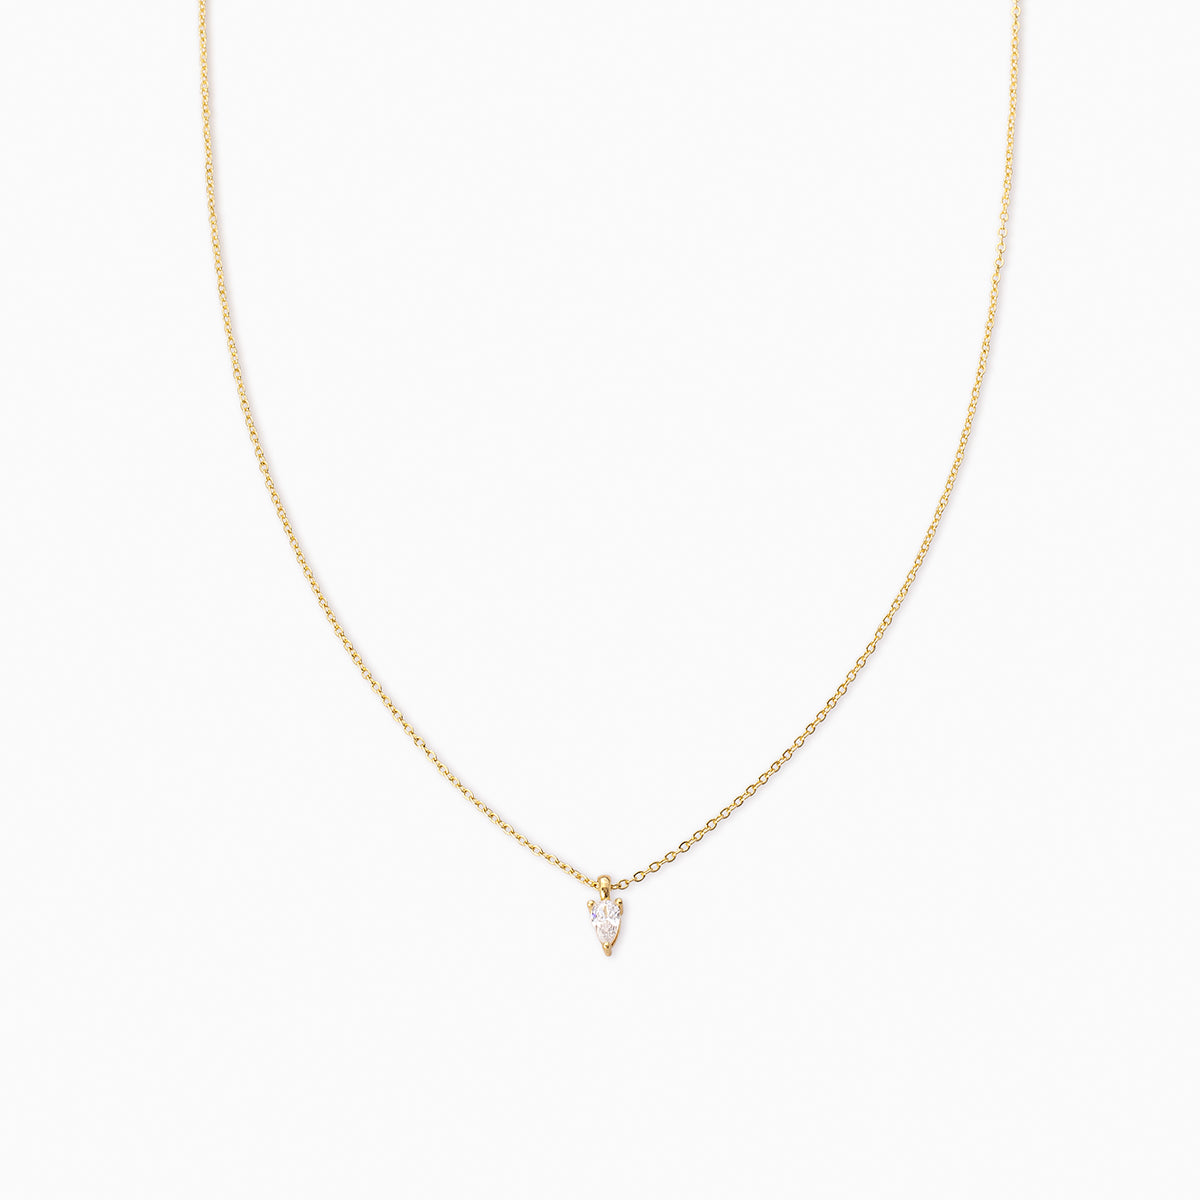 Gold Diamond Heart Pendant Necklace | Women's Jewelry by Uncommon James